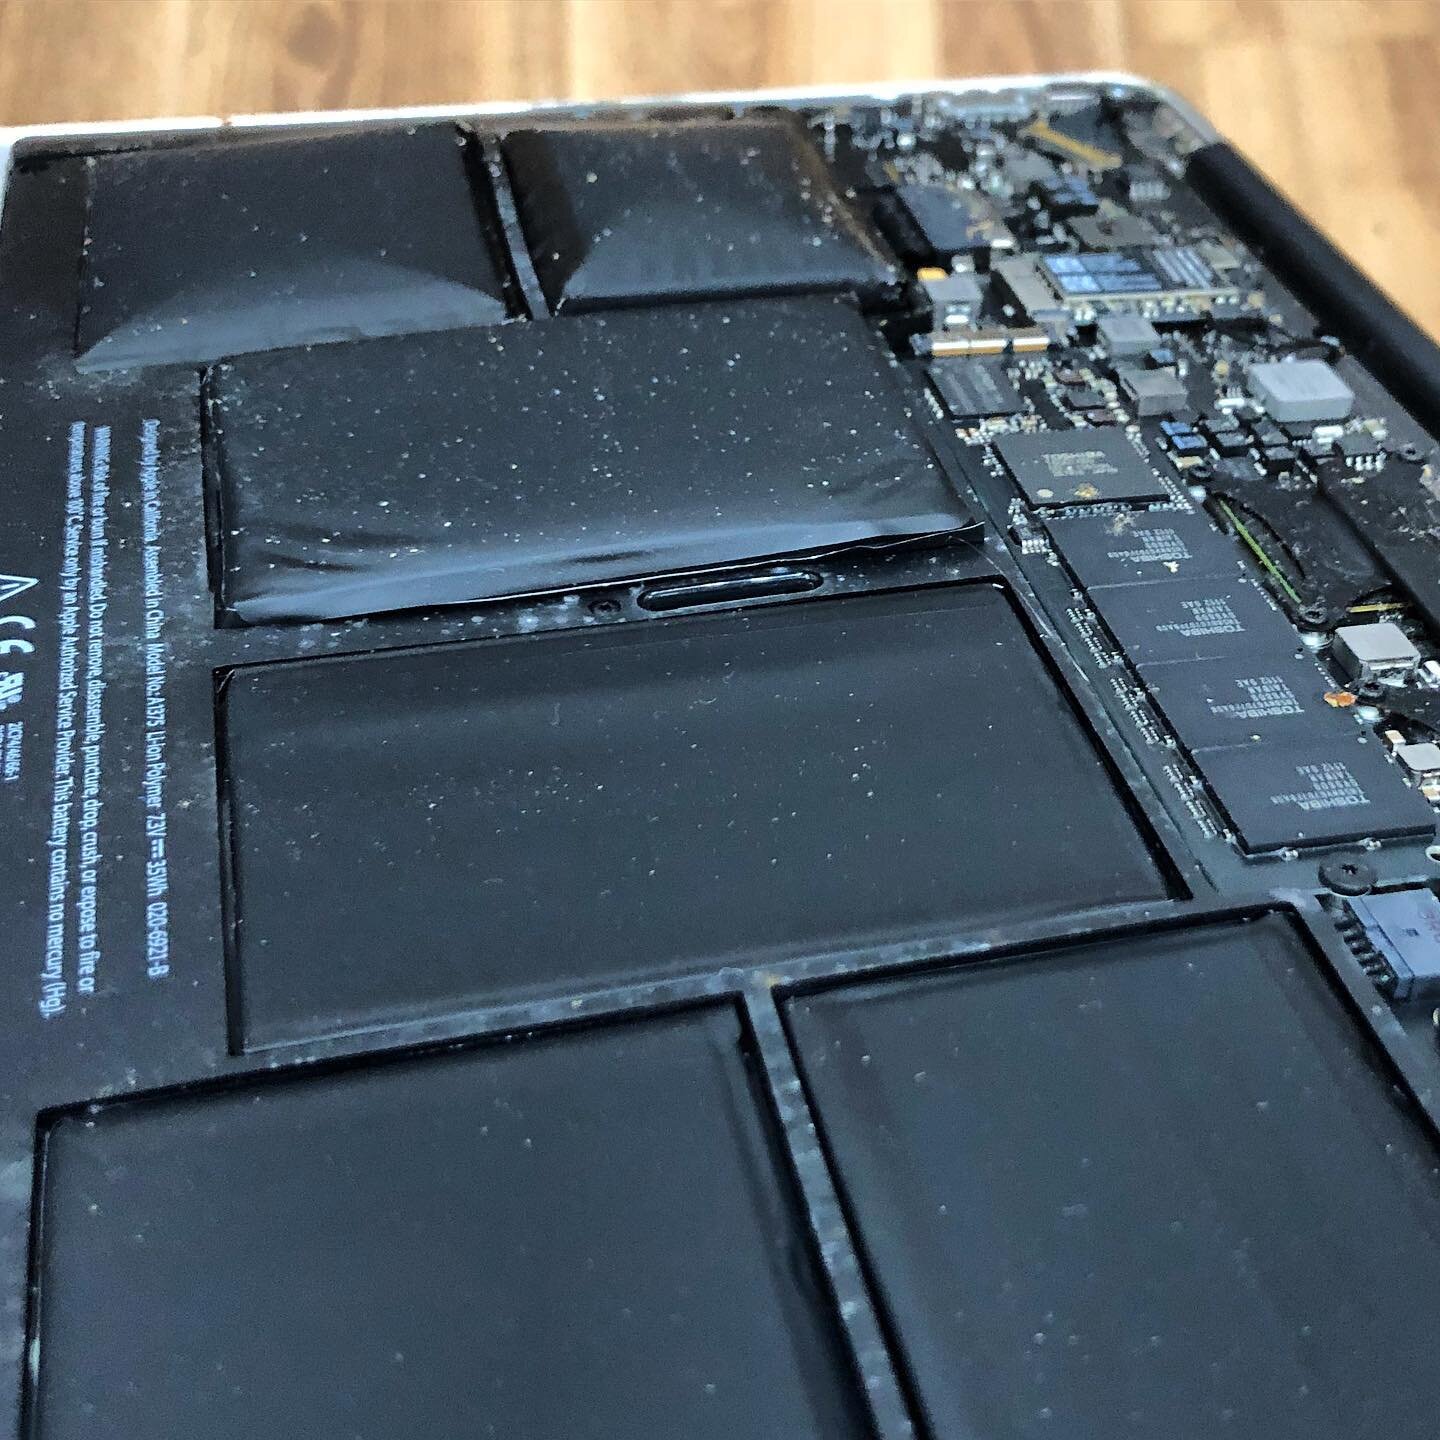 Those big pillows are the result of a neglected battery change. This MacBook Air was impossible to use because the battery was pushing so hard on the top case. A new battery and this computer was as good as new. #rocketrepair